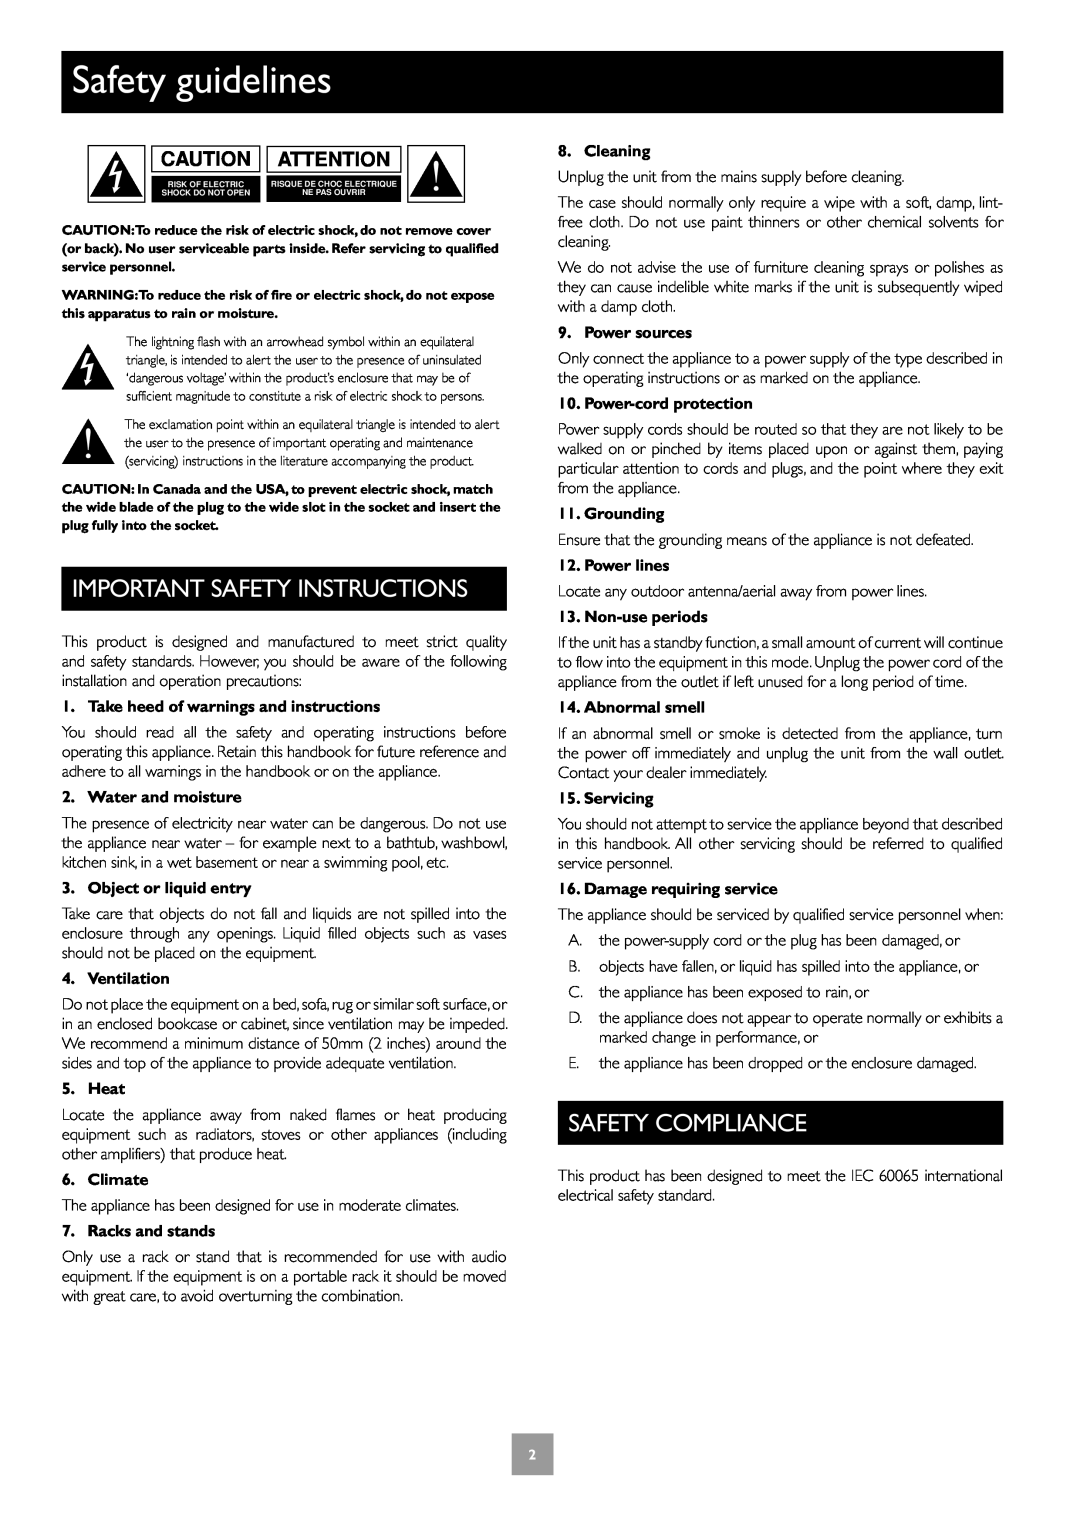 Arcam C30, P35, P1 manual Safety guidelines, Important Safety Instructions, Safety Compliance 